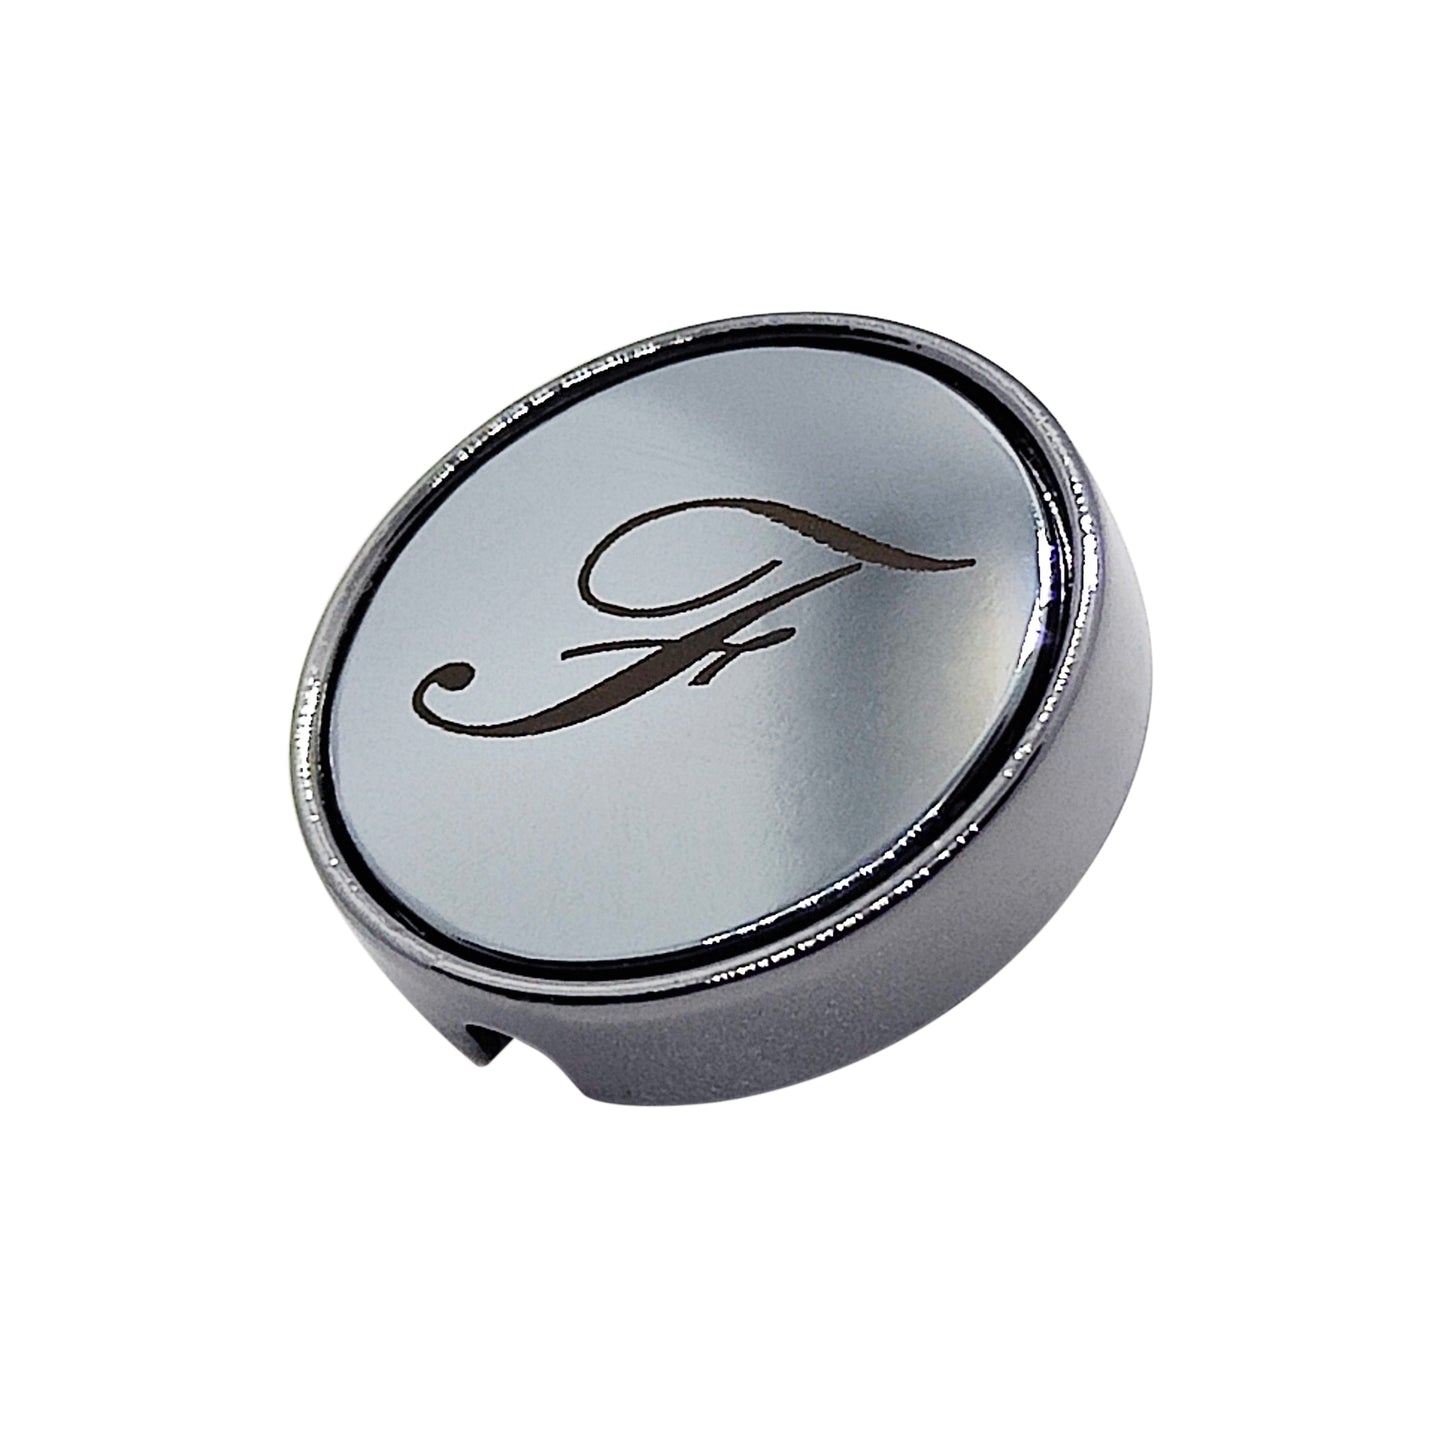 21mm button in carbon and hematite metal